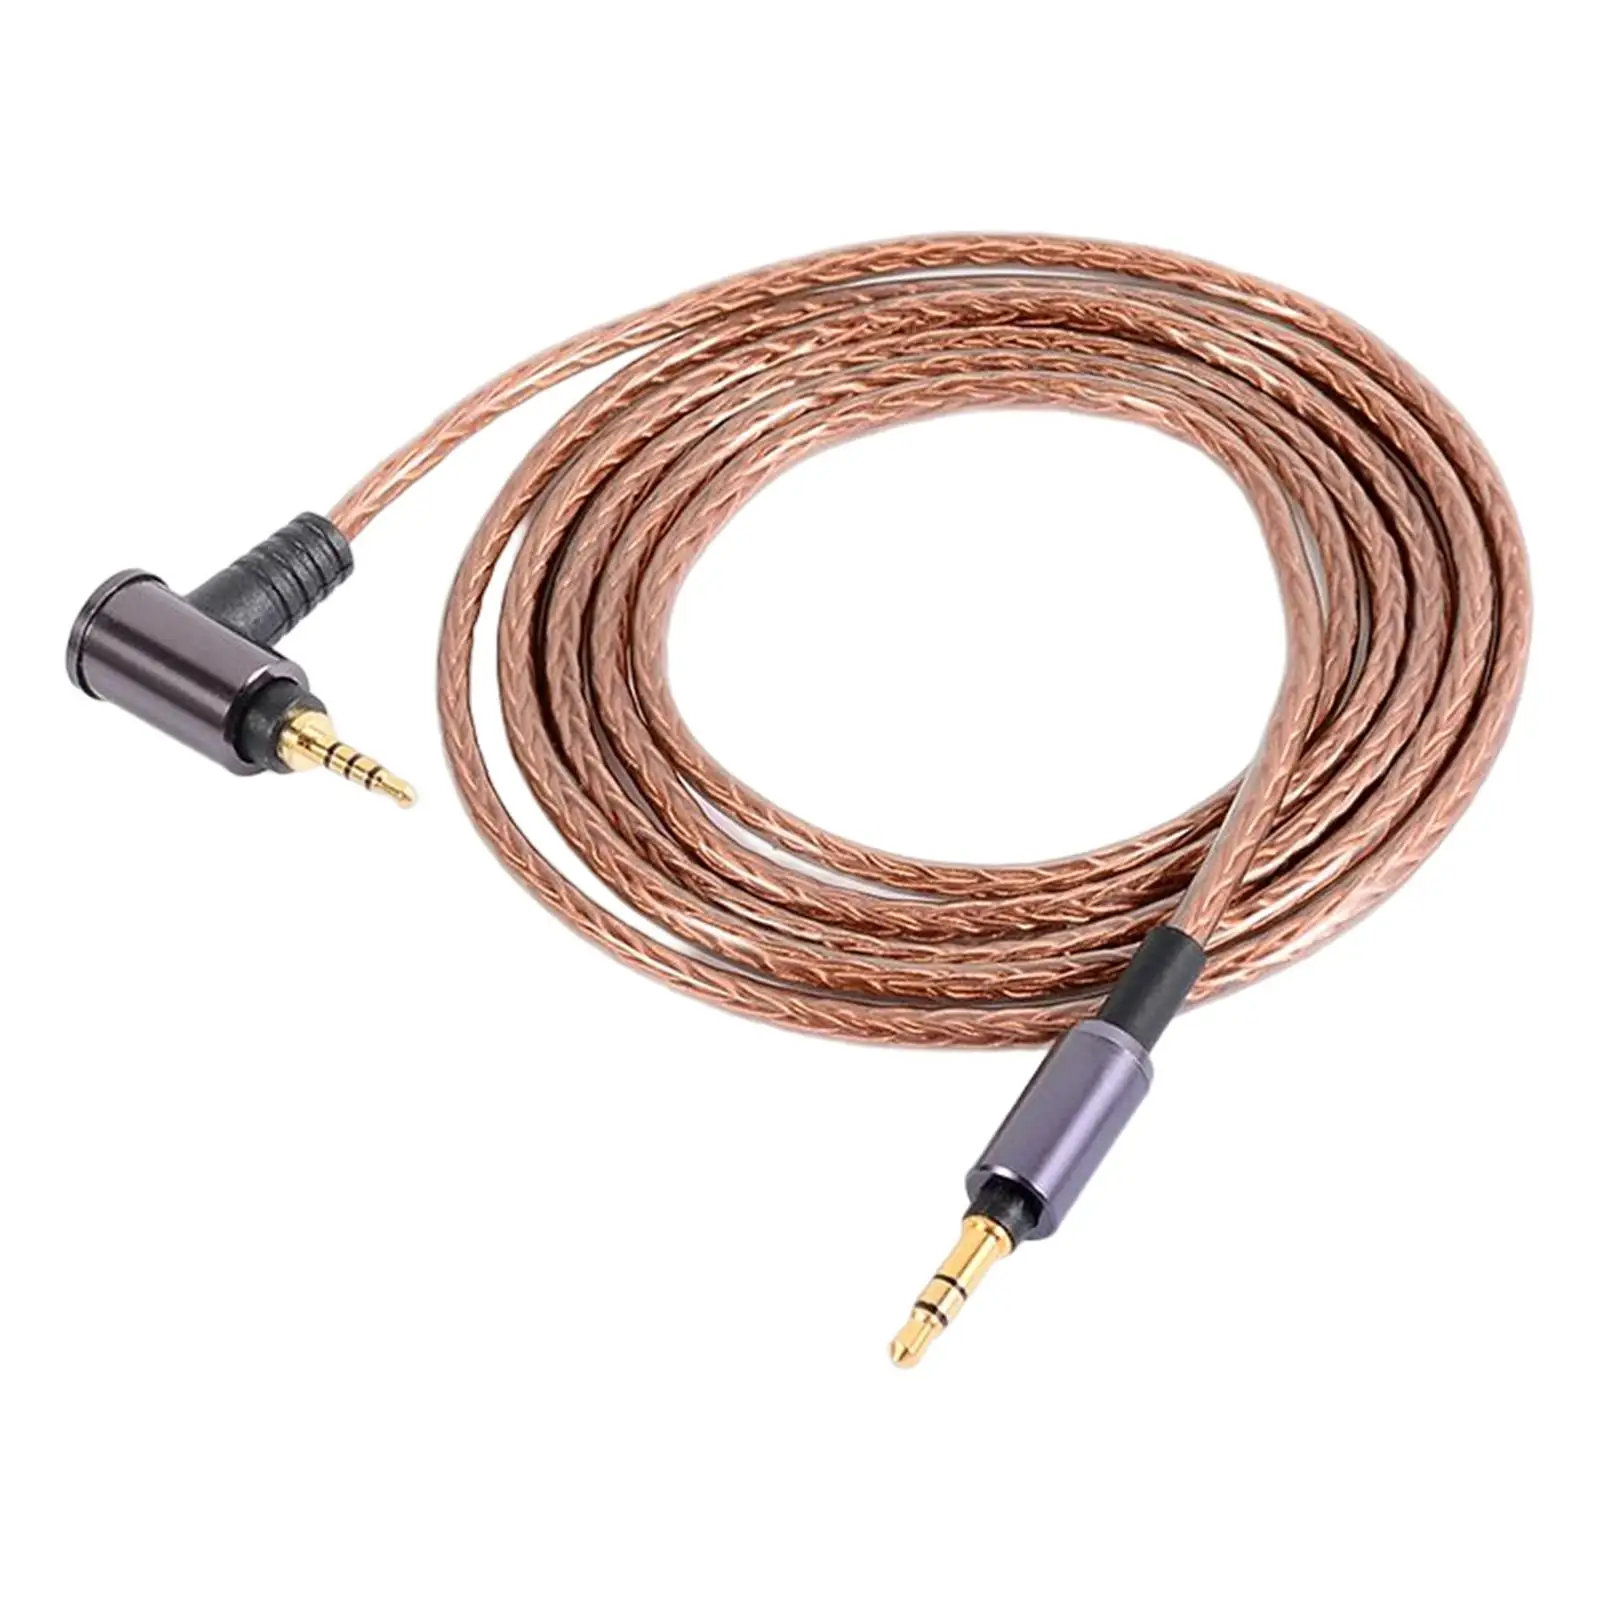 Cable Replacement AUX Audio Cord 10004, Lightweight 55inch Long